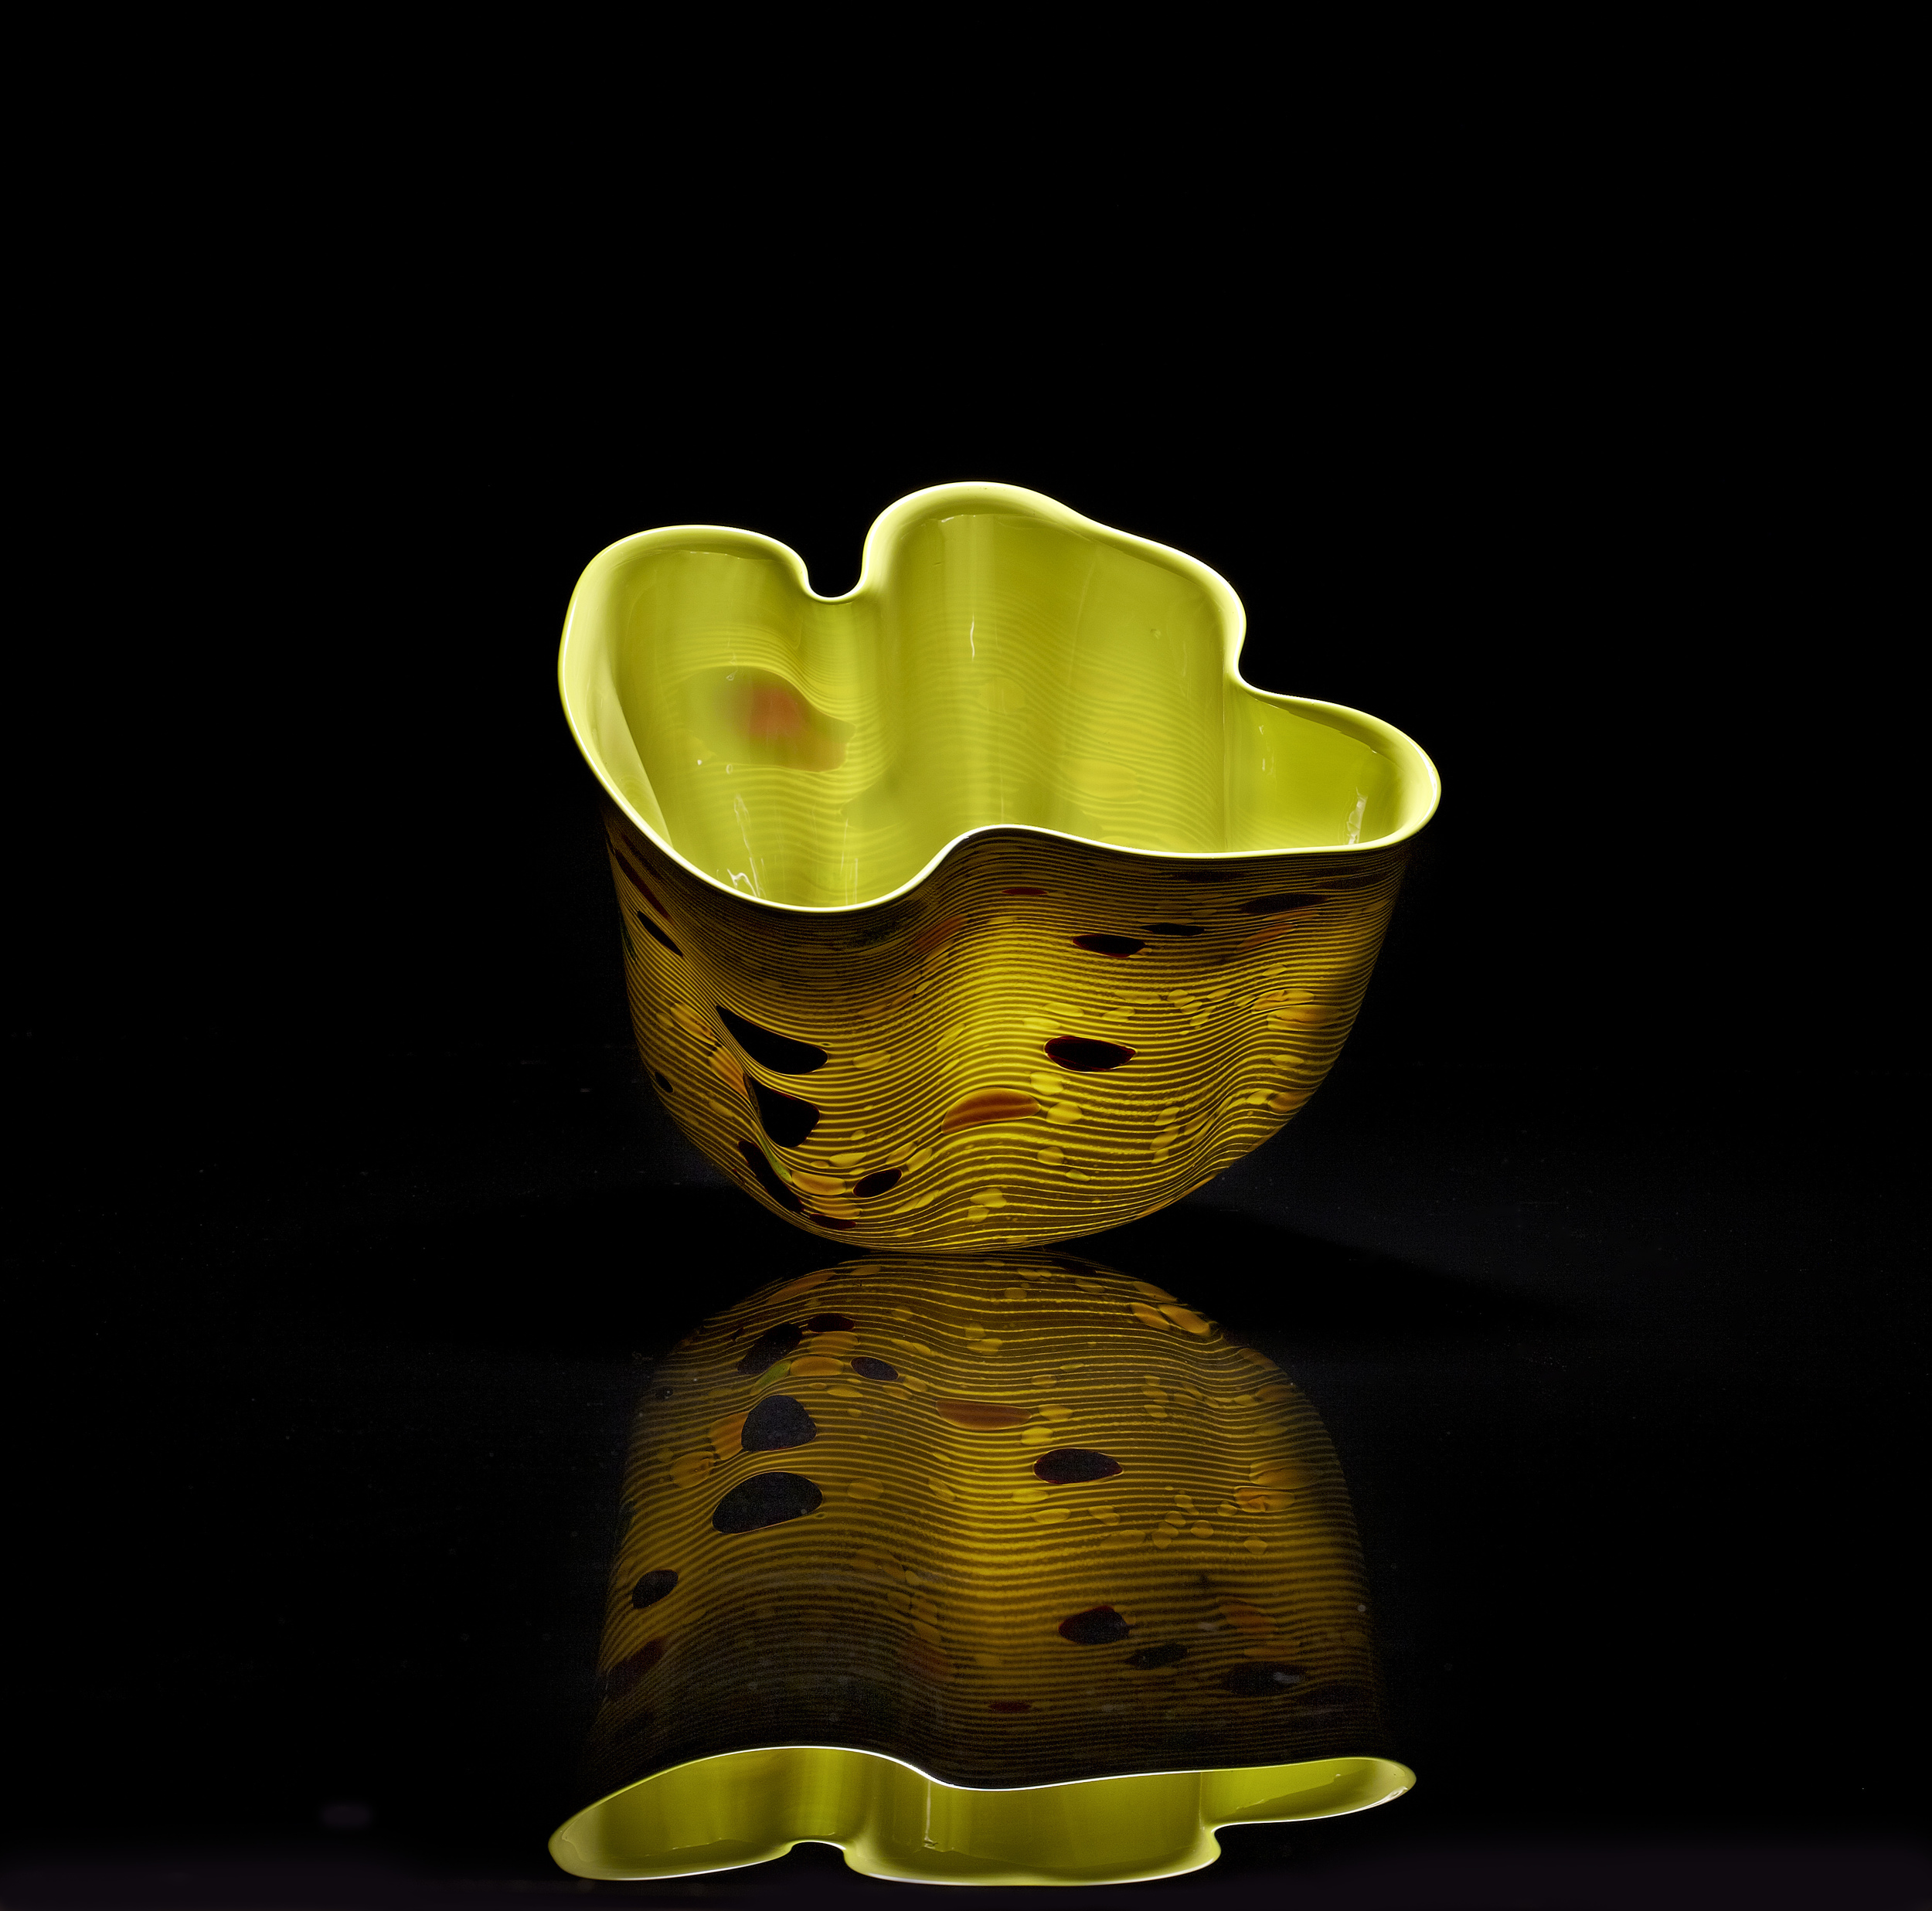  Dale Chihuly,&nbsp; Olive Green Macchia with Cobalt Lip Wrap&nbsp; (1982, glass, 9 x 8 x 7 inches) 